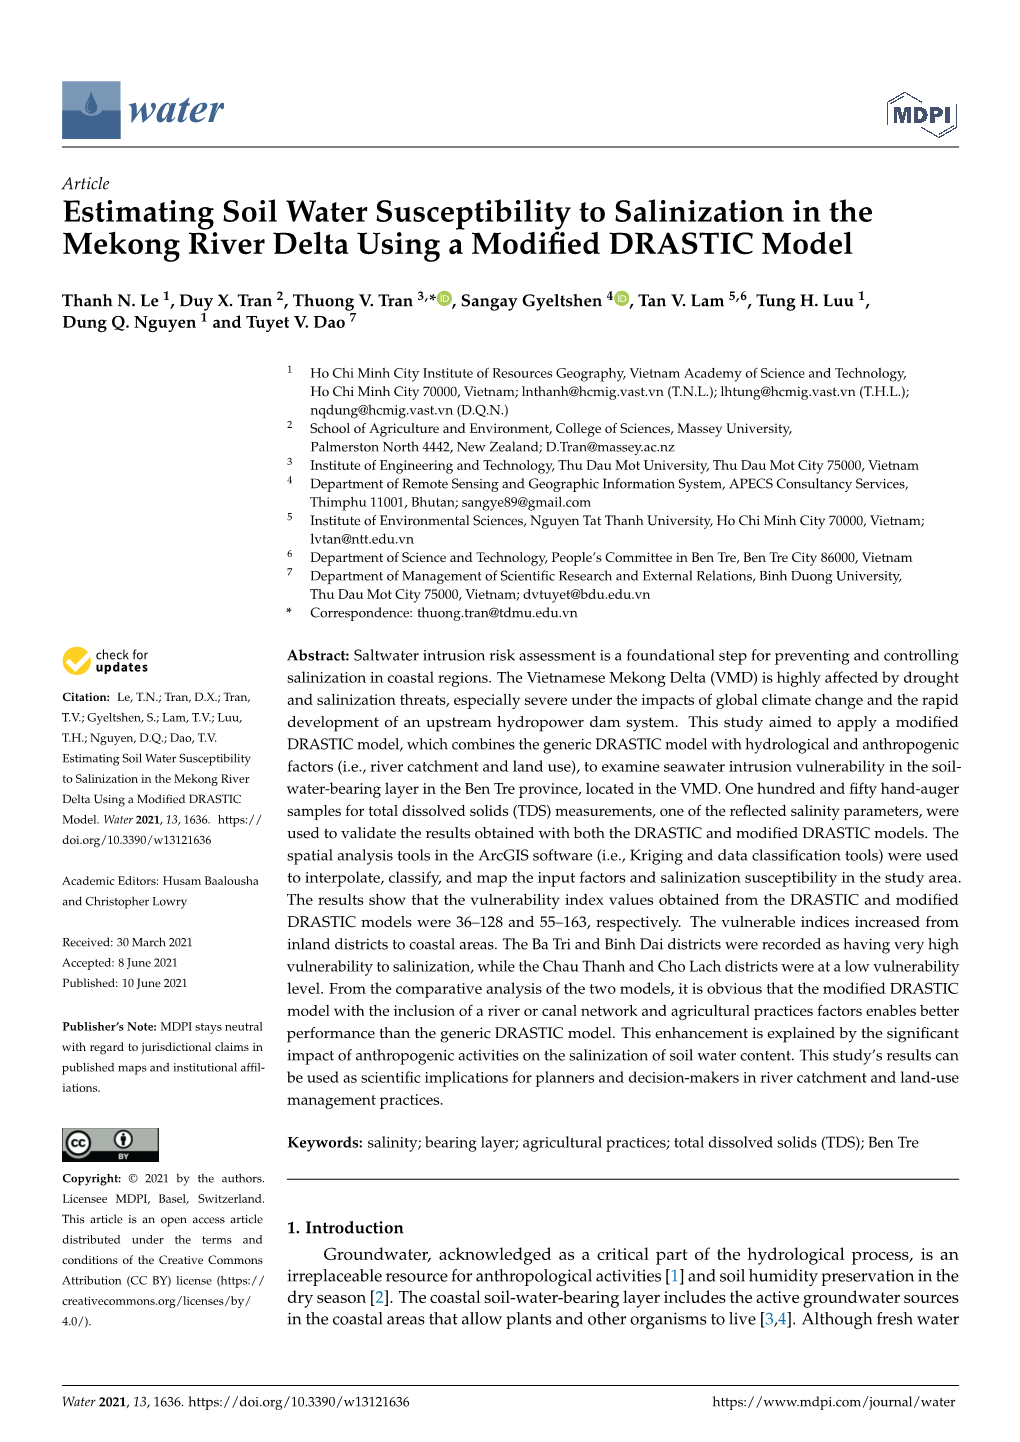 Estimating Soil Water Susceptibility to Salinization in the Mekong River Delta Using a Modiﬁed DRASTIC Model